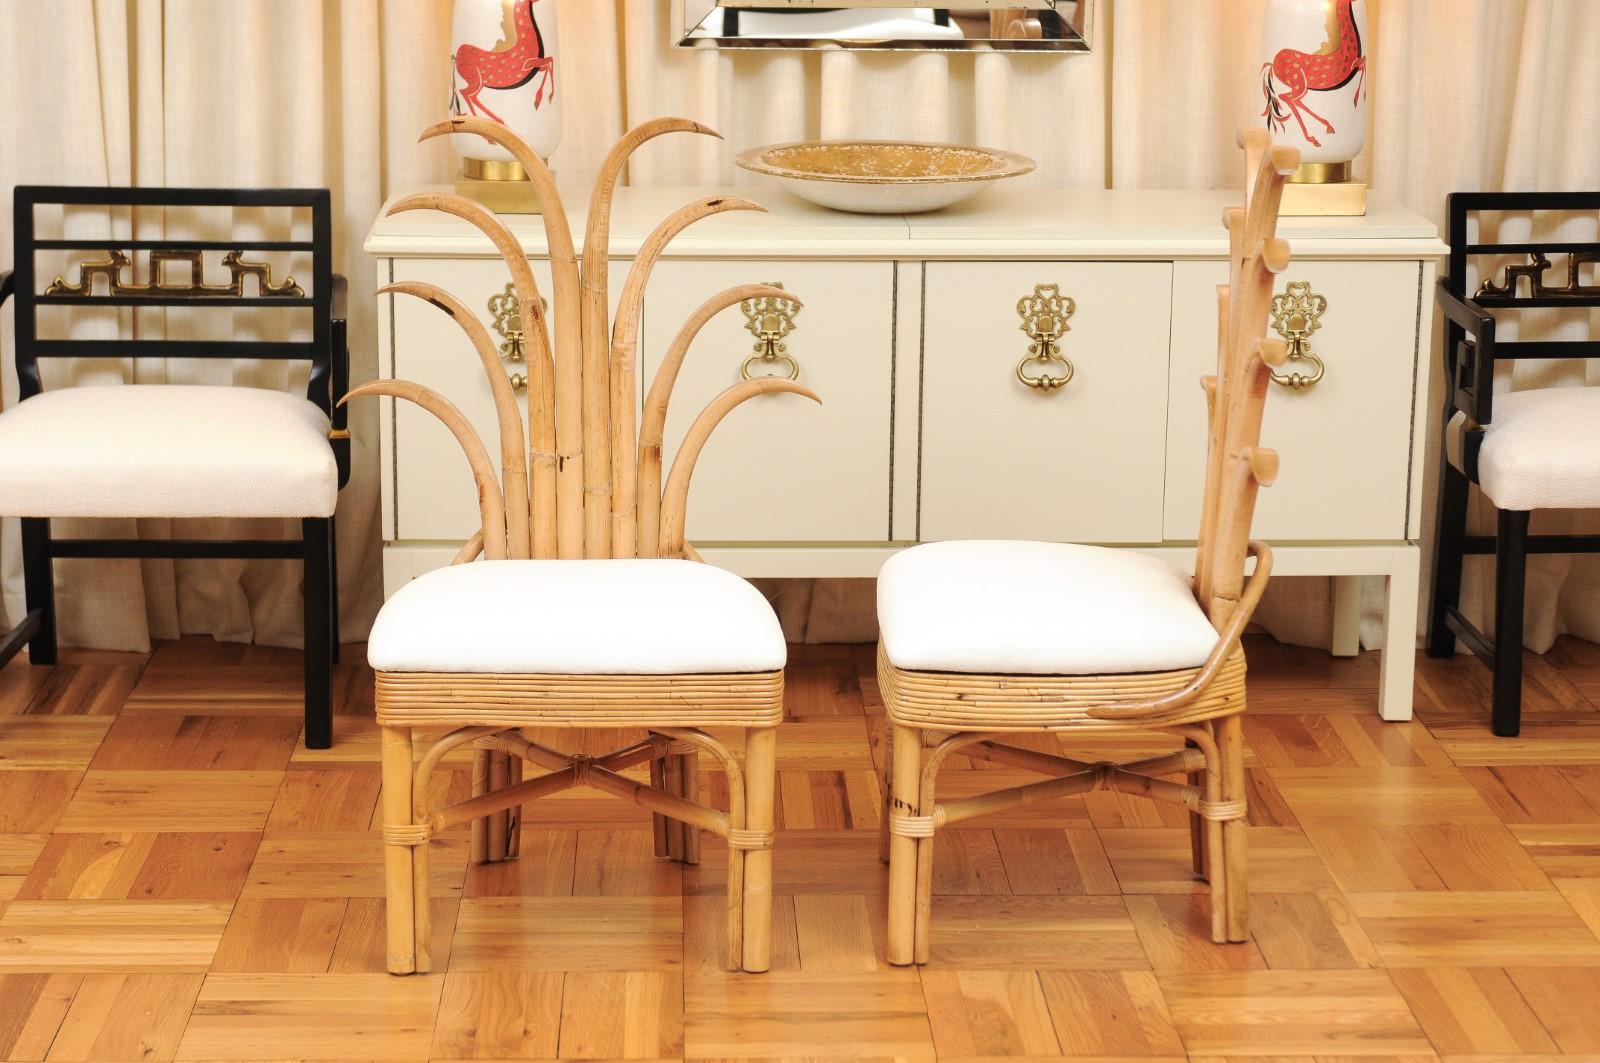 Exquisite Set of 10 Rattan and Cane Palm Frond Dining Chairs, circa 1950 For Sale 7